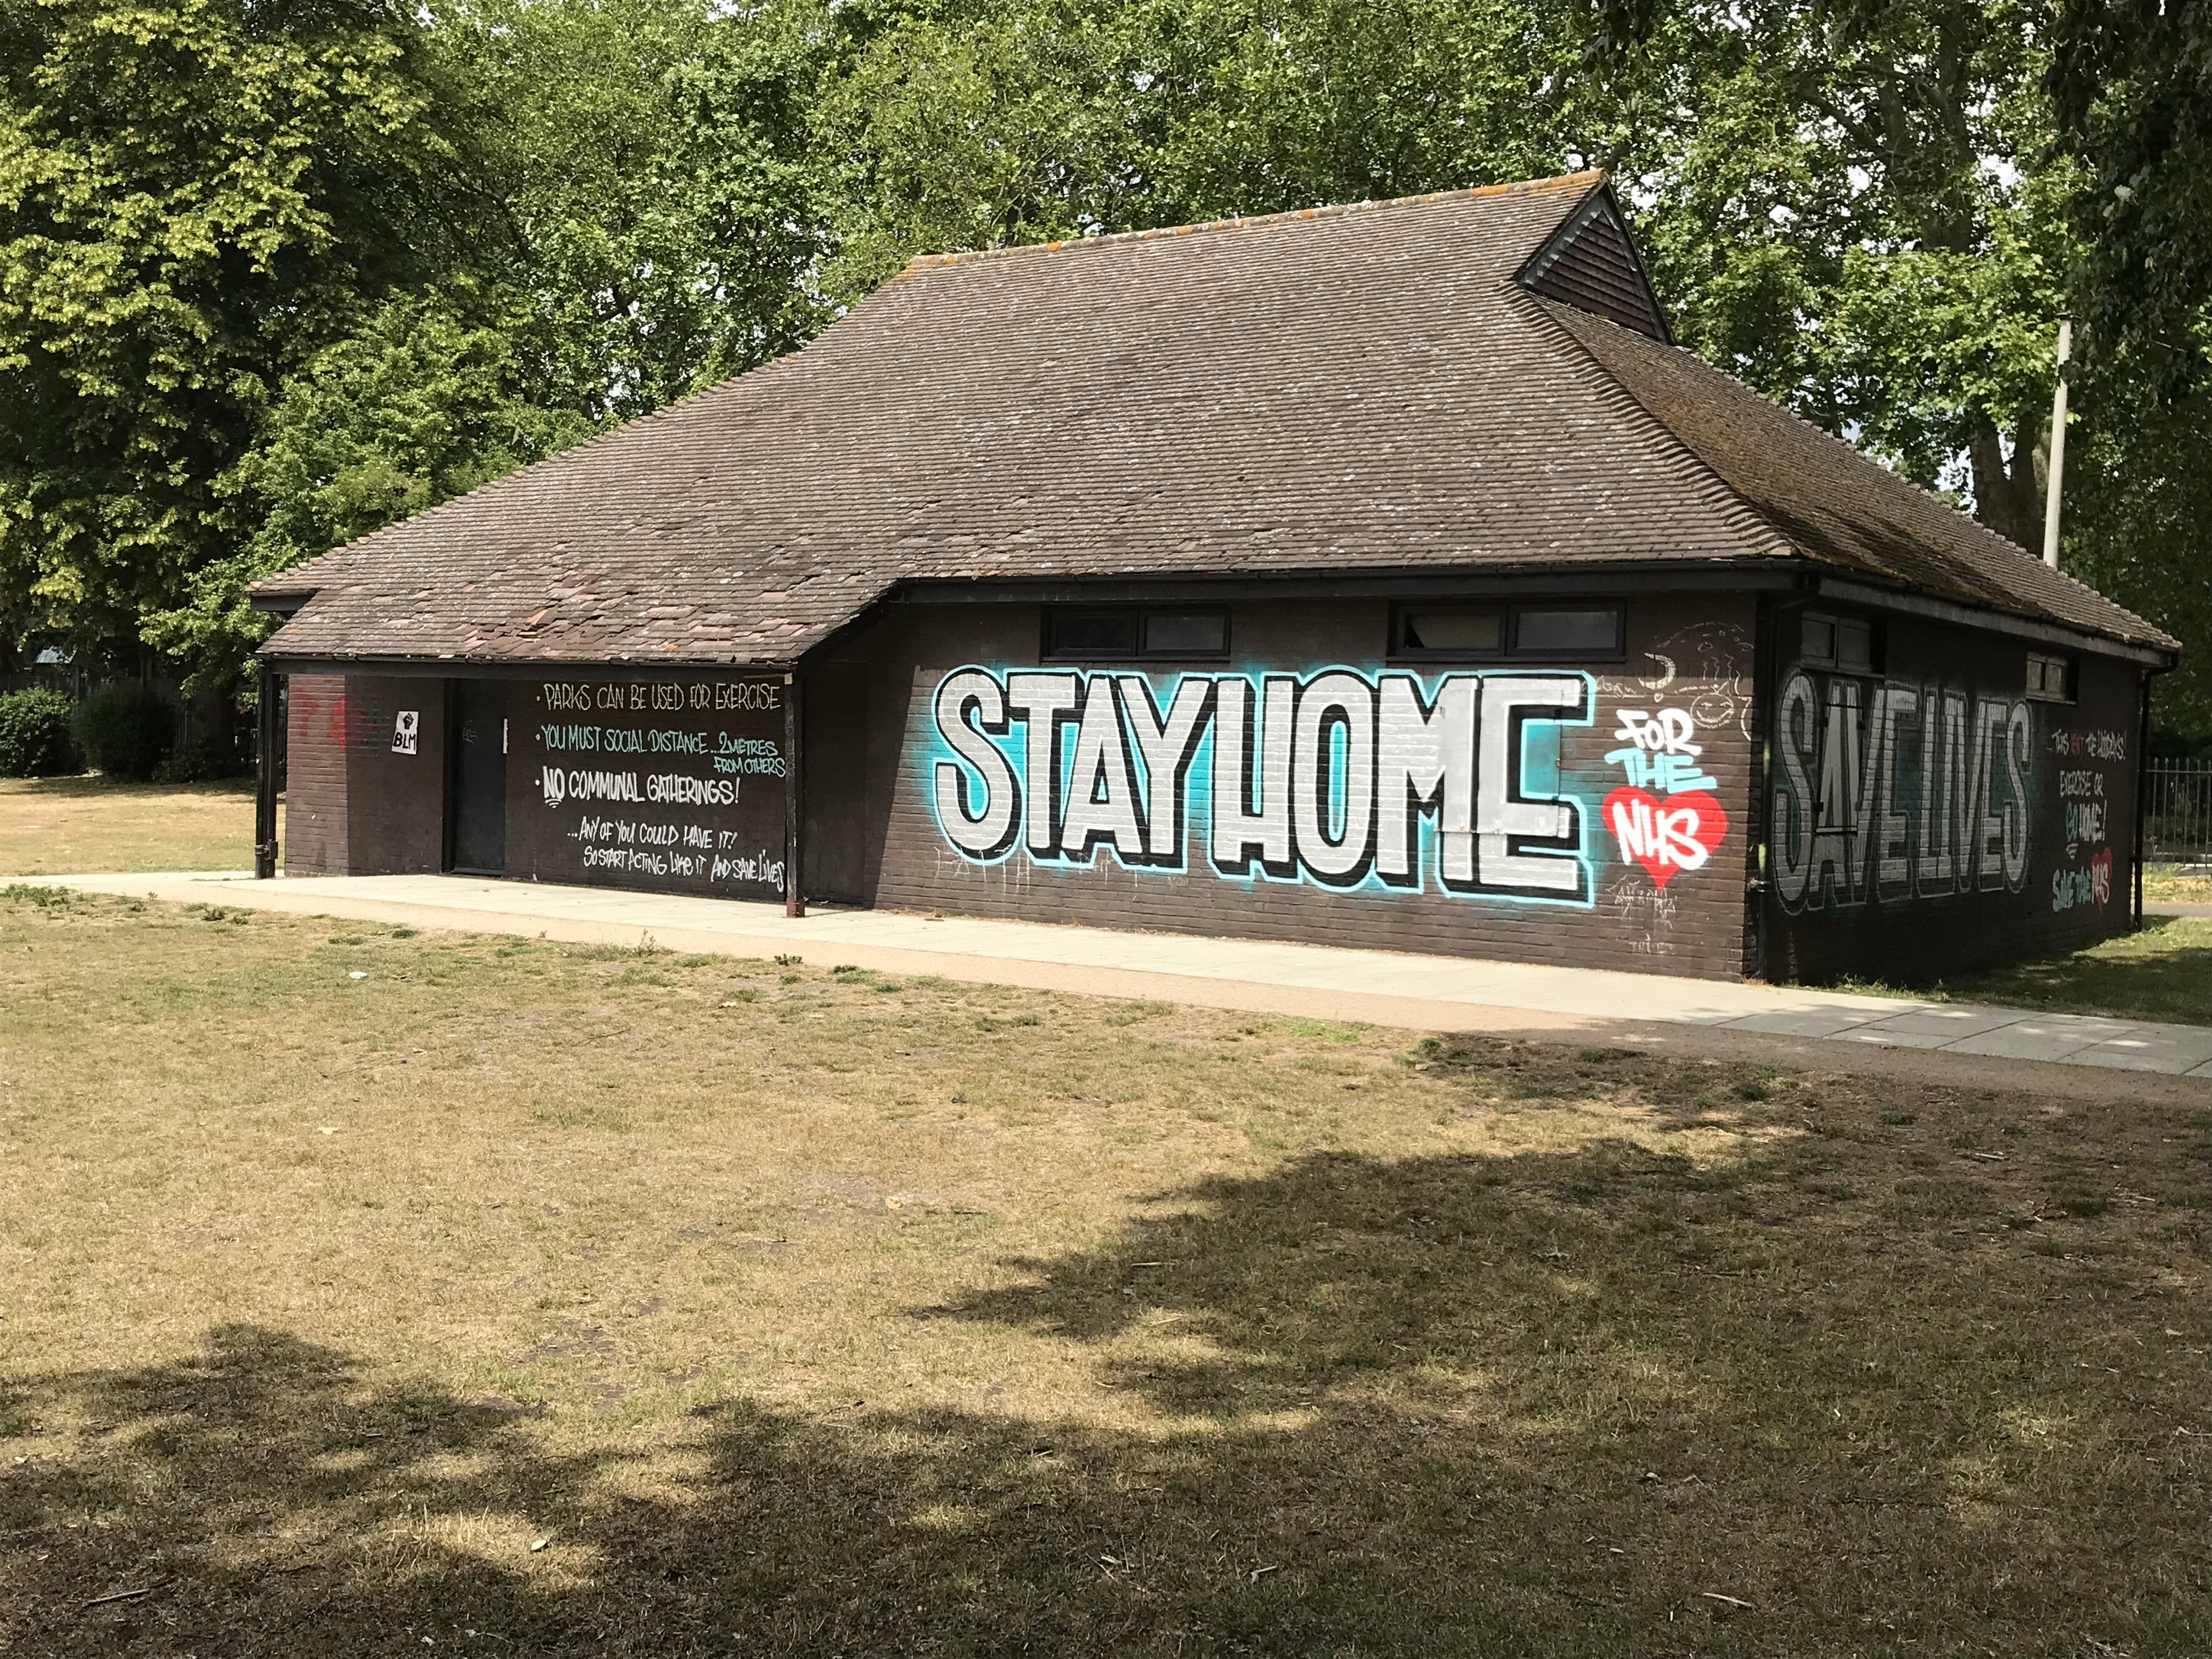 Graffiti style artwork saying &#039;Stay home, save lives&#039; on the building in the Fairfield.